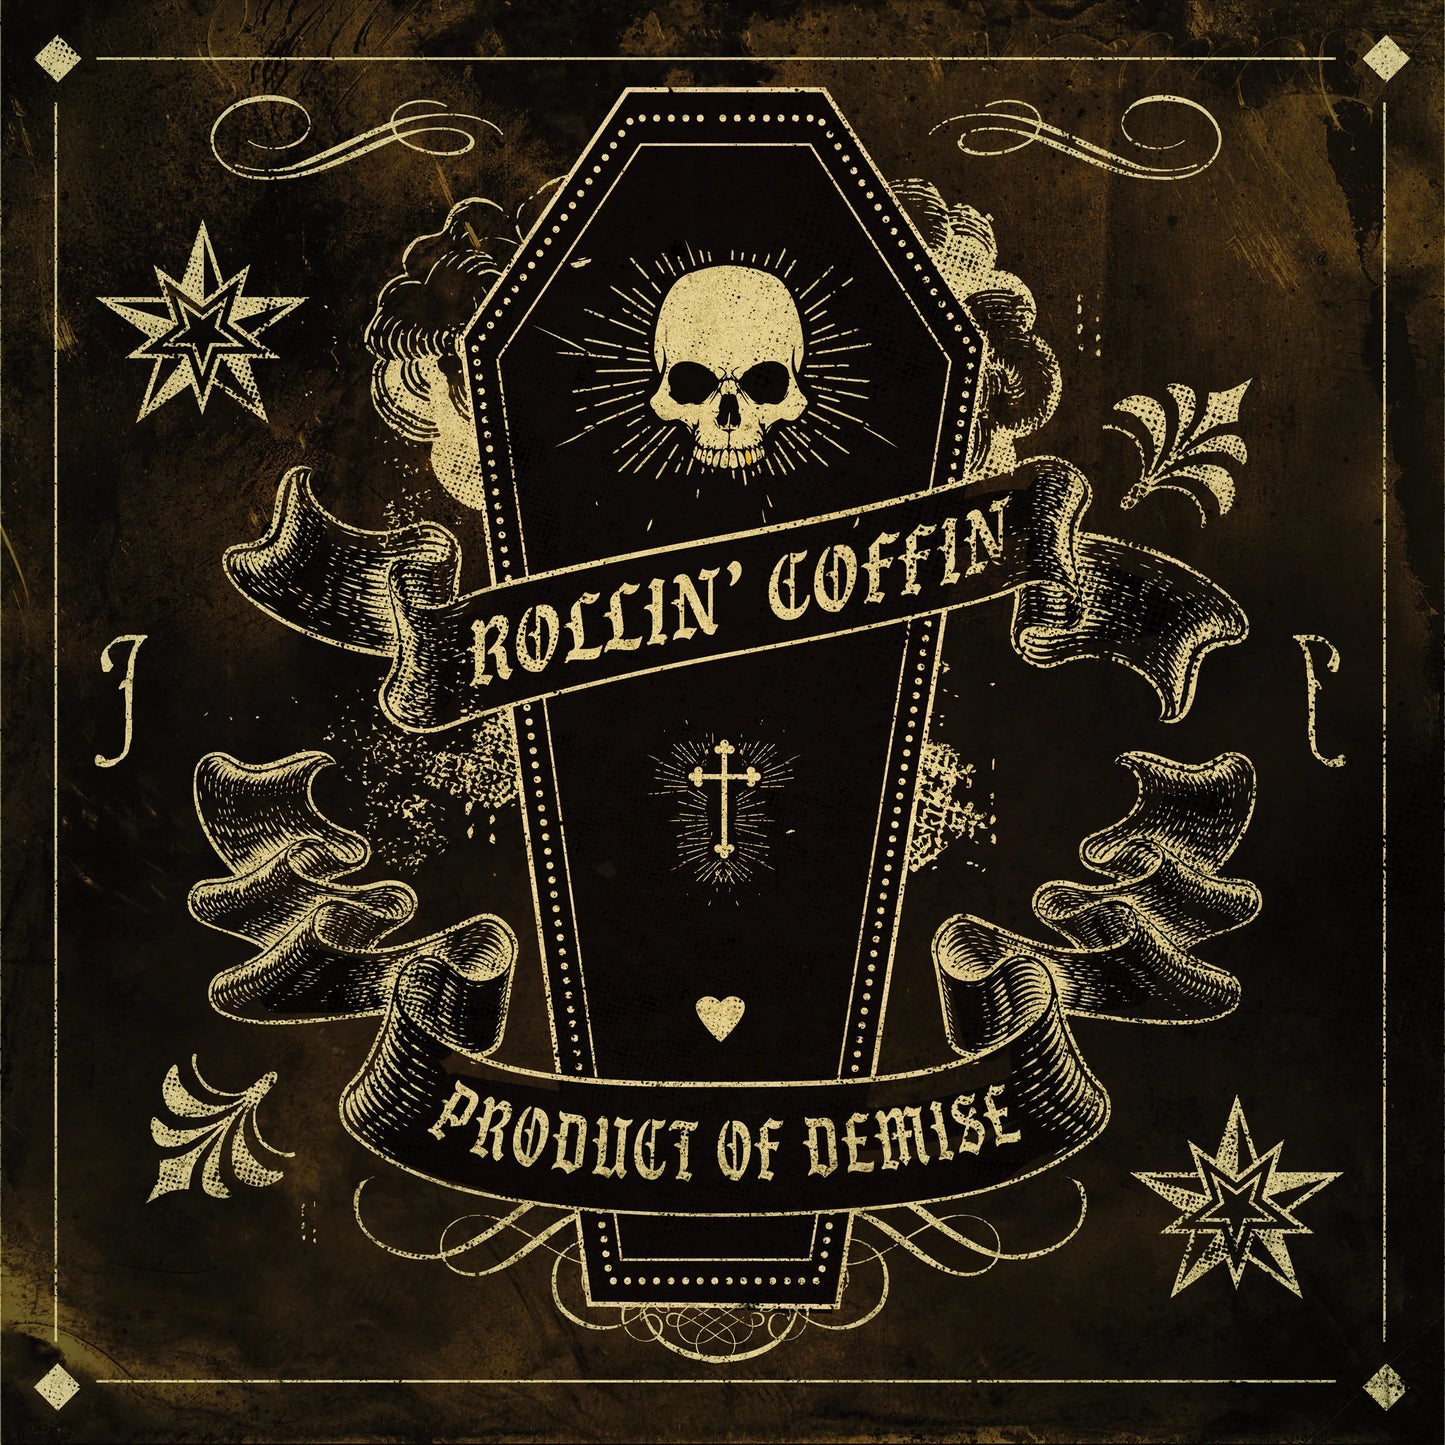 Rollin' Coffin - Product Of Demise LP